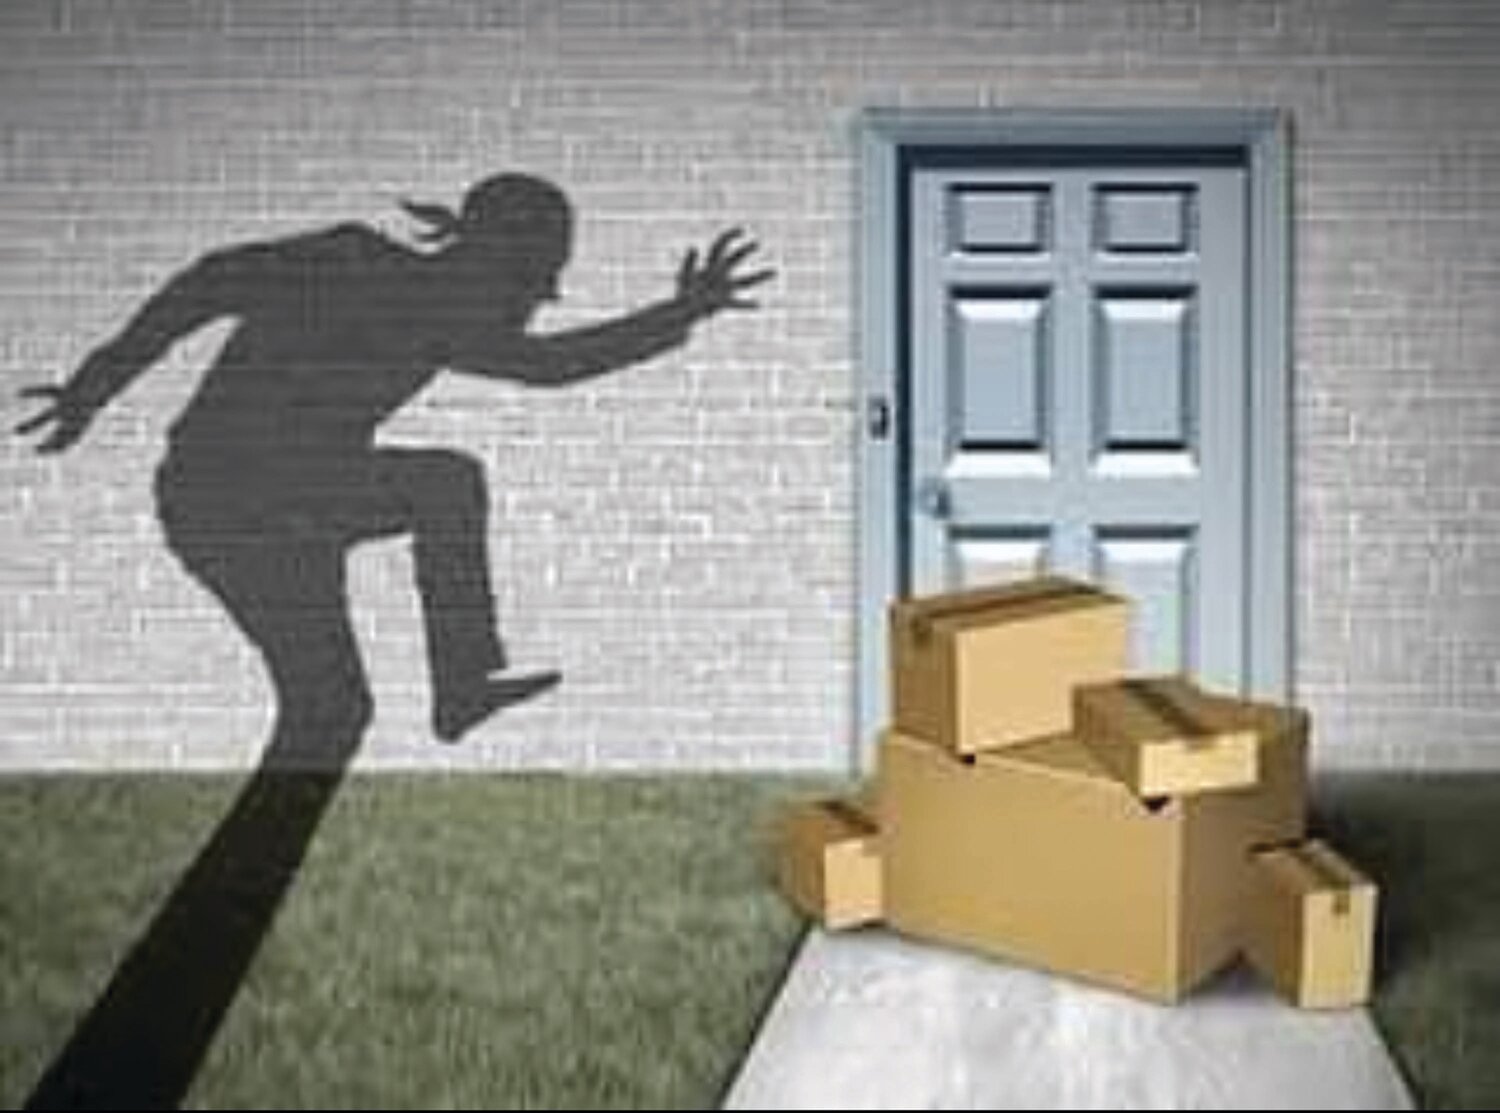 HIGH SEAS TO THE FRONT PORCH: Cranston Police are warning of package thefts during the holiday season. They offered a few tips to help protect residents from a “porch pirate” and published this image depicting a would-be package thief.